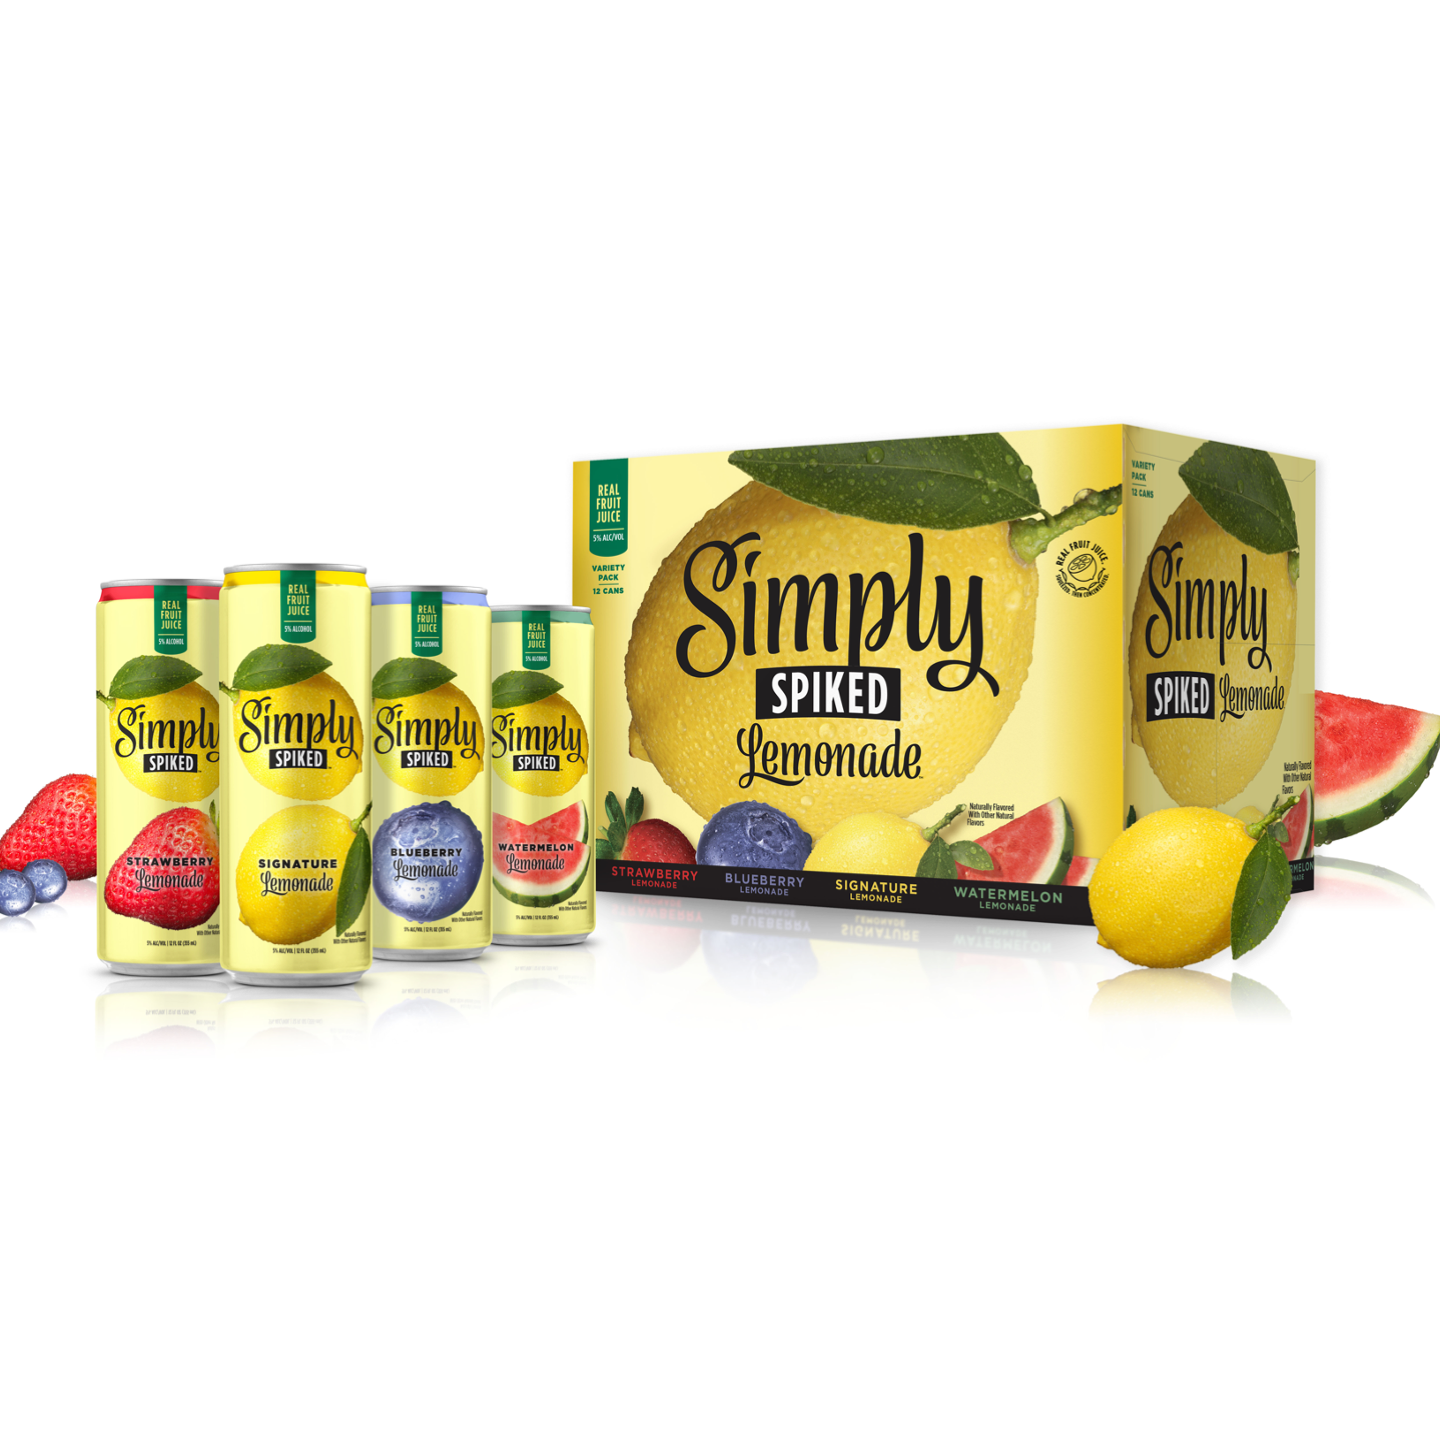 Simply Spiked Lemonade Announcement - News  Articles